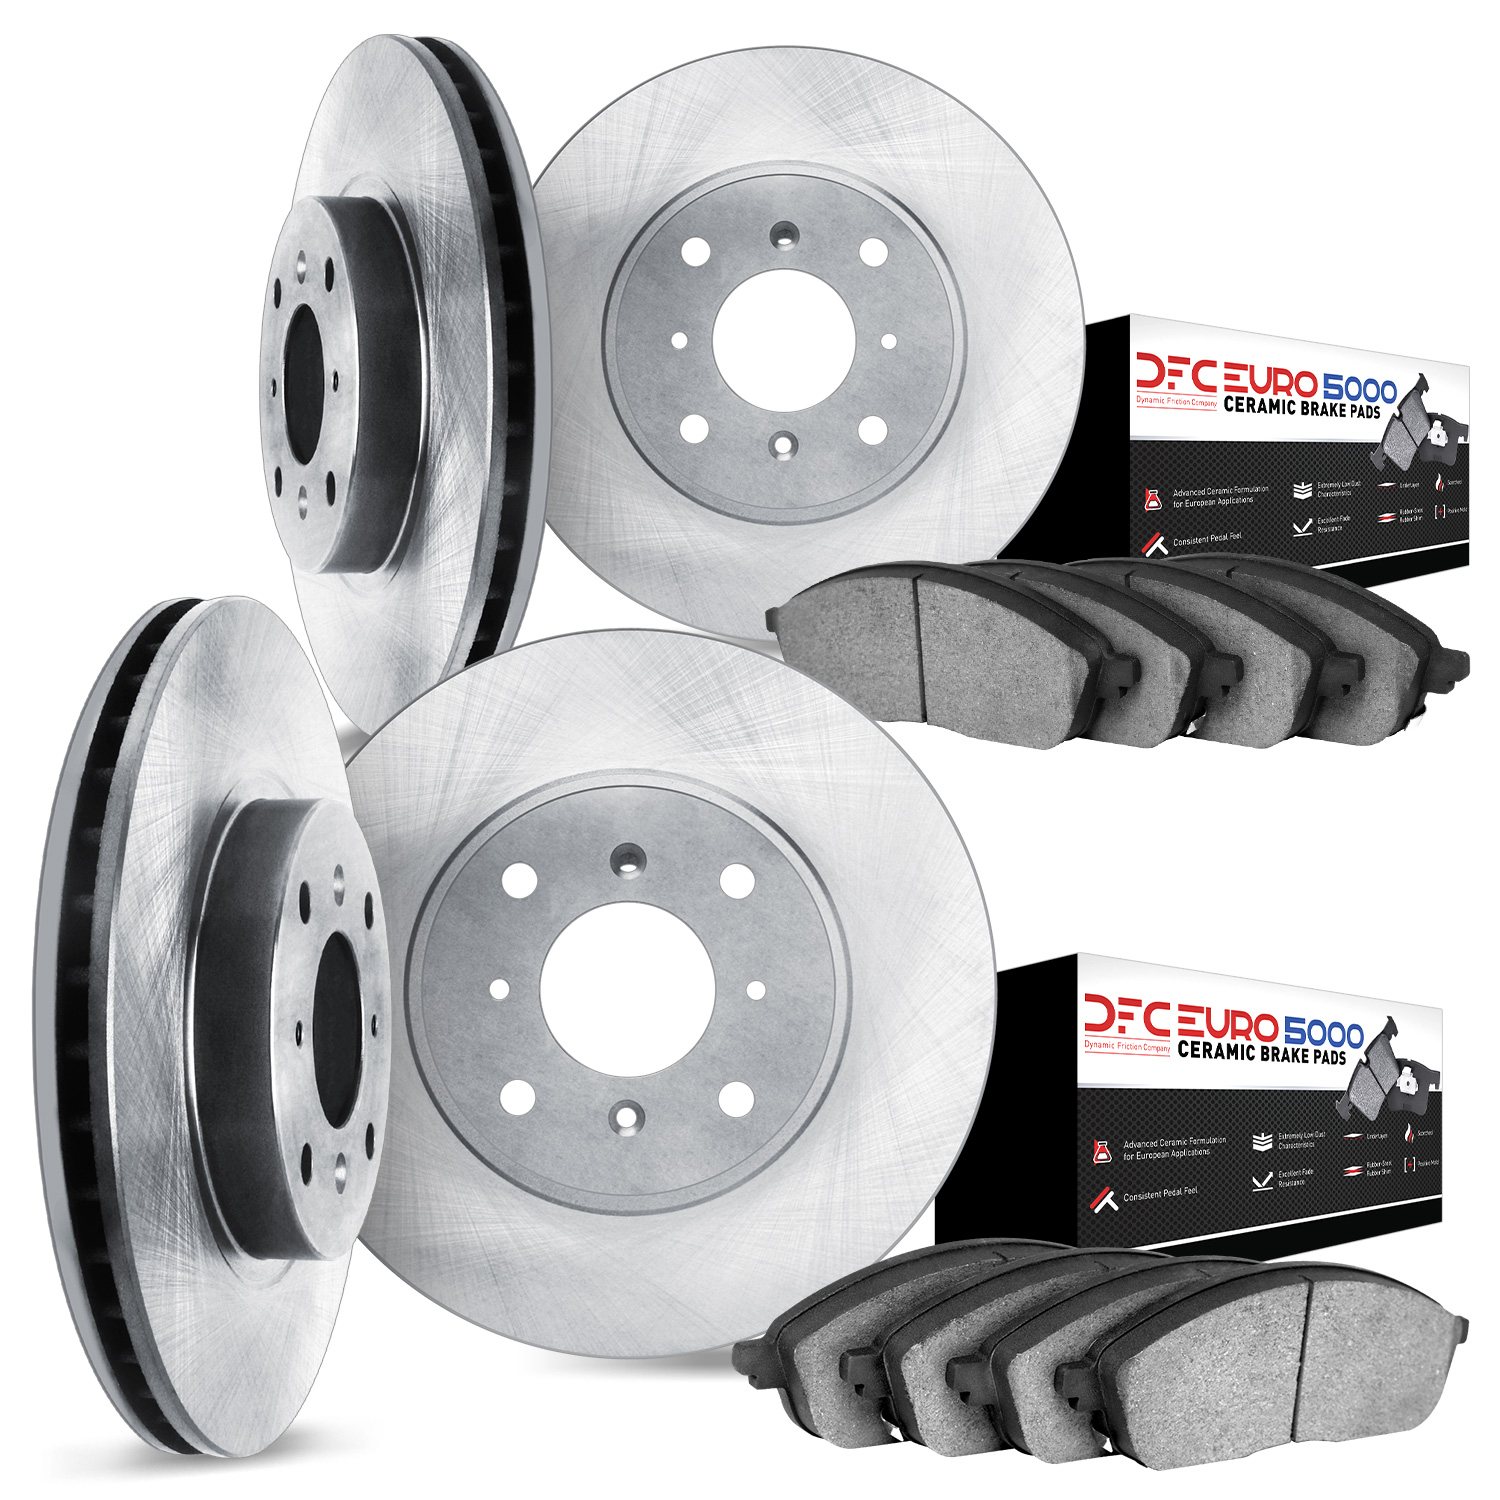 6604-56000 Brake Rotors w/5000 Euro Ceramic Brake Pads, 1995-2000 Ford/Lincoln/Mercury/Mazda, Position: Front and Rear